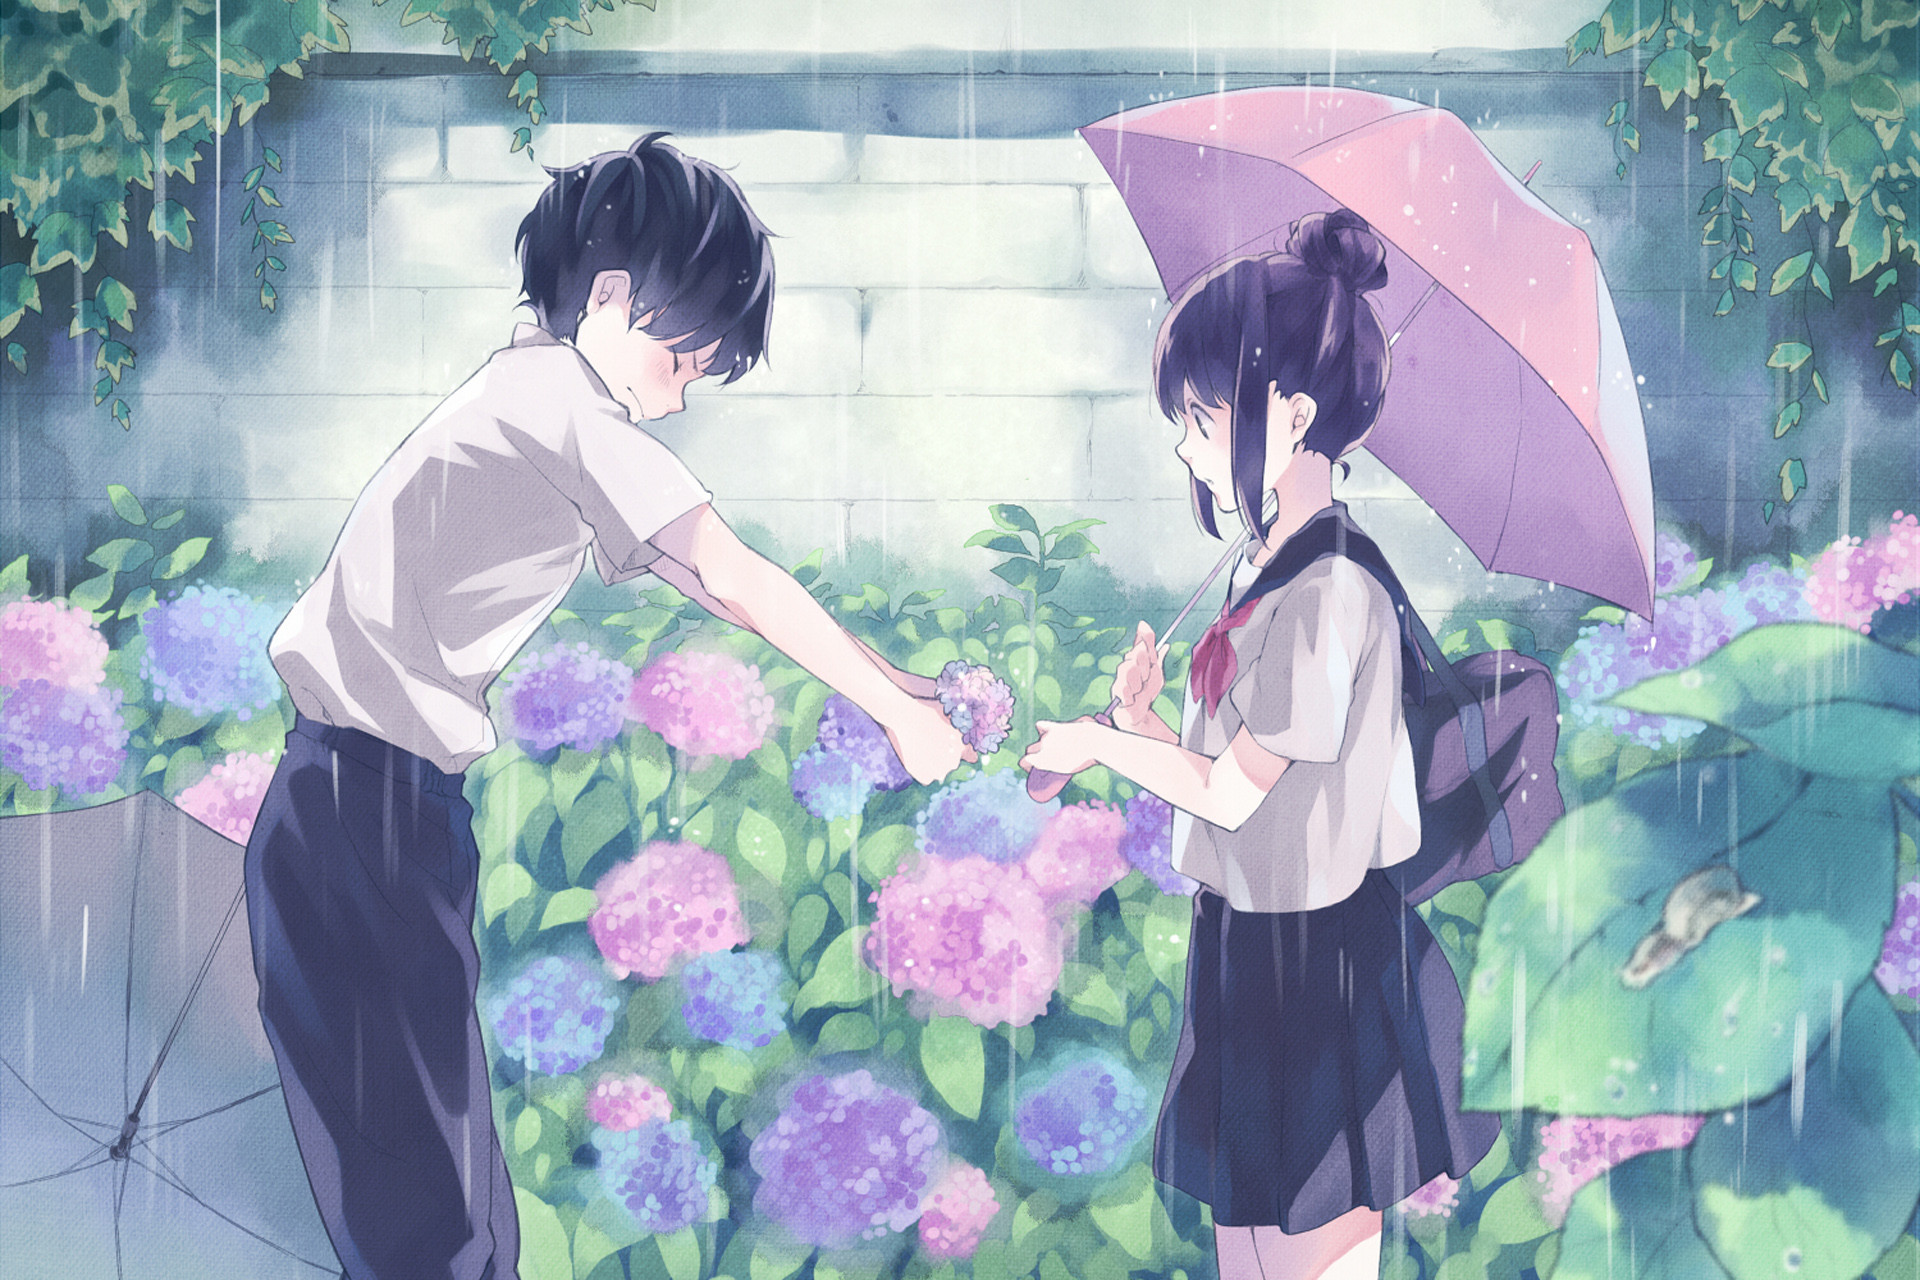 1920x1280 Beautiful Anime Couple Wallpaper HD Images One HD 